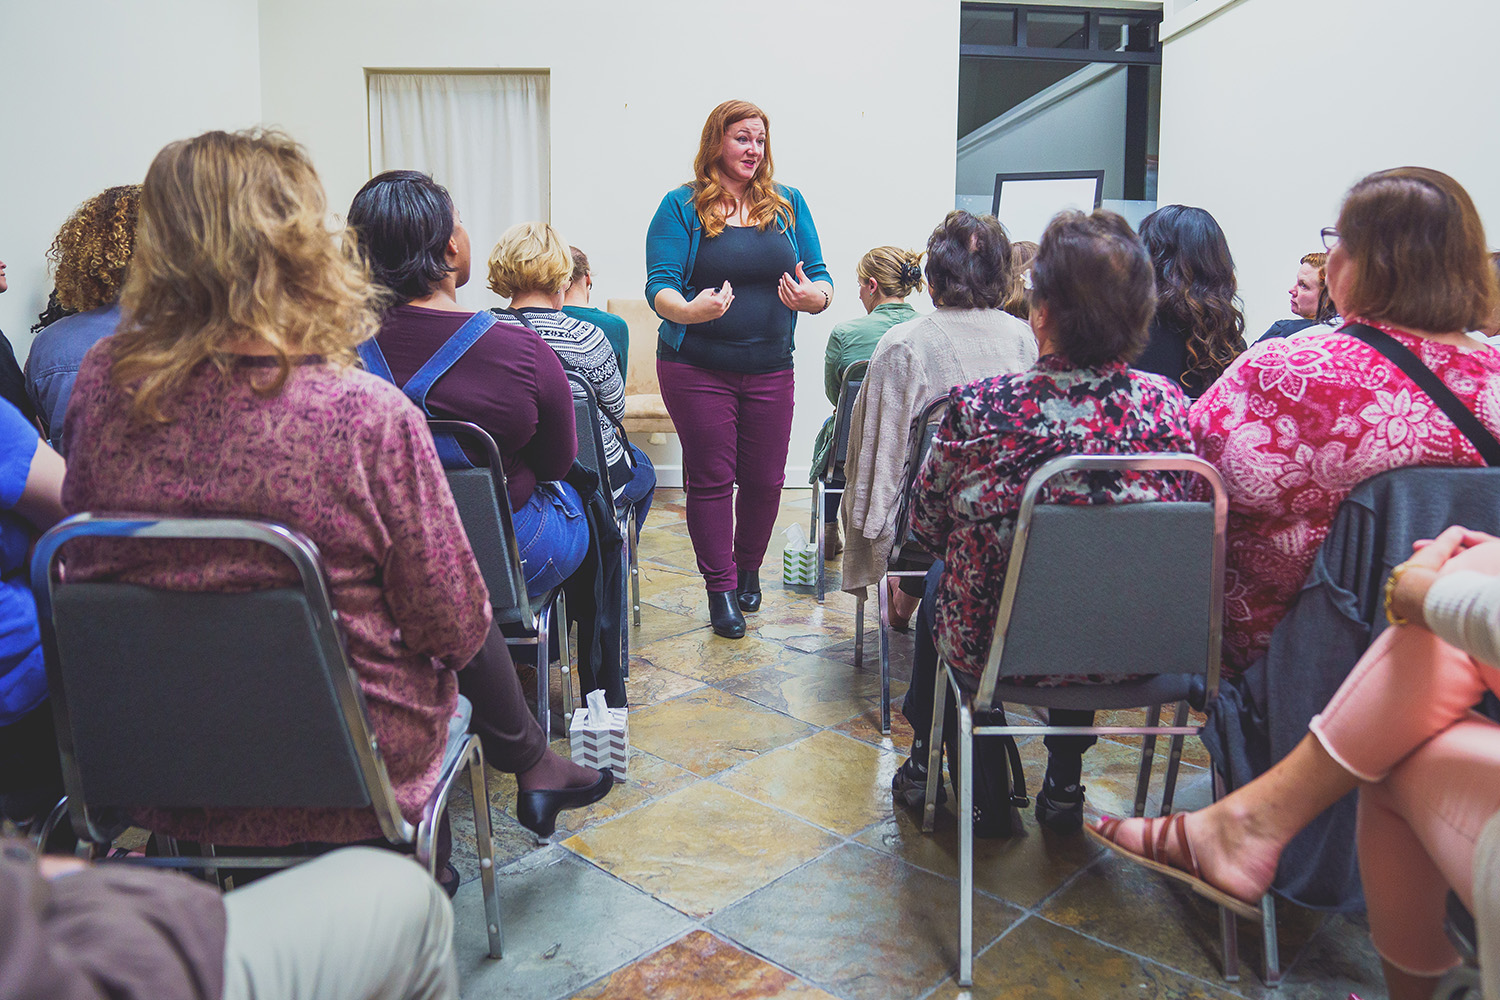 San Diego based Psychic, Melissa Peil speaking with a group